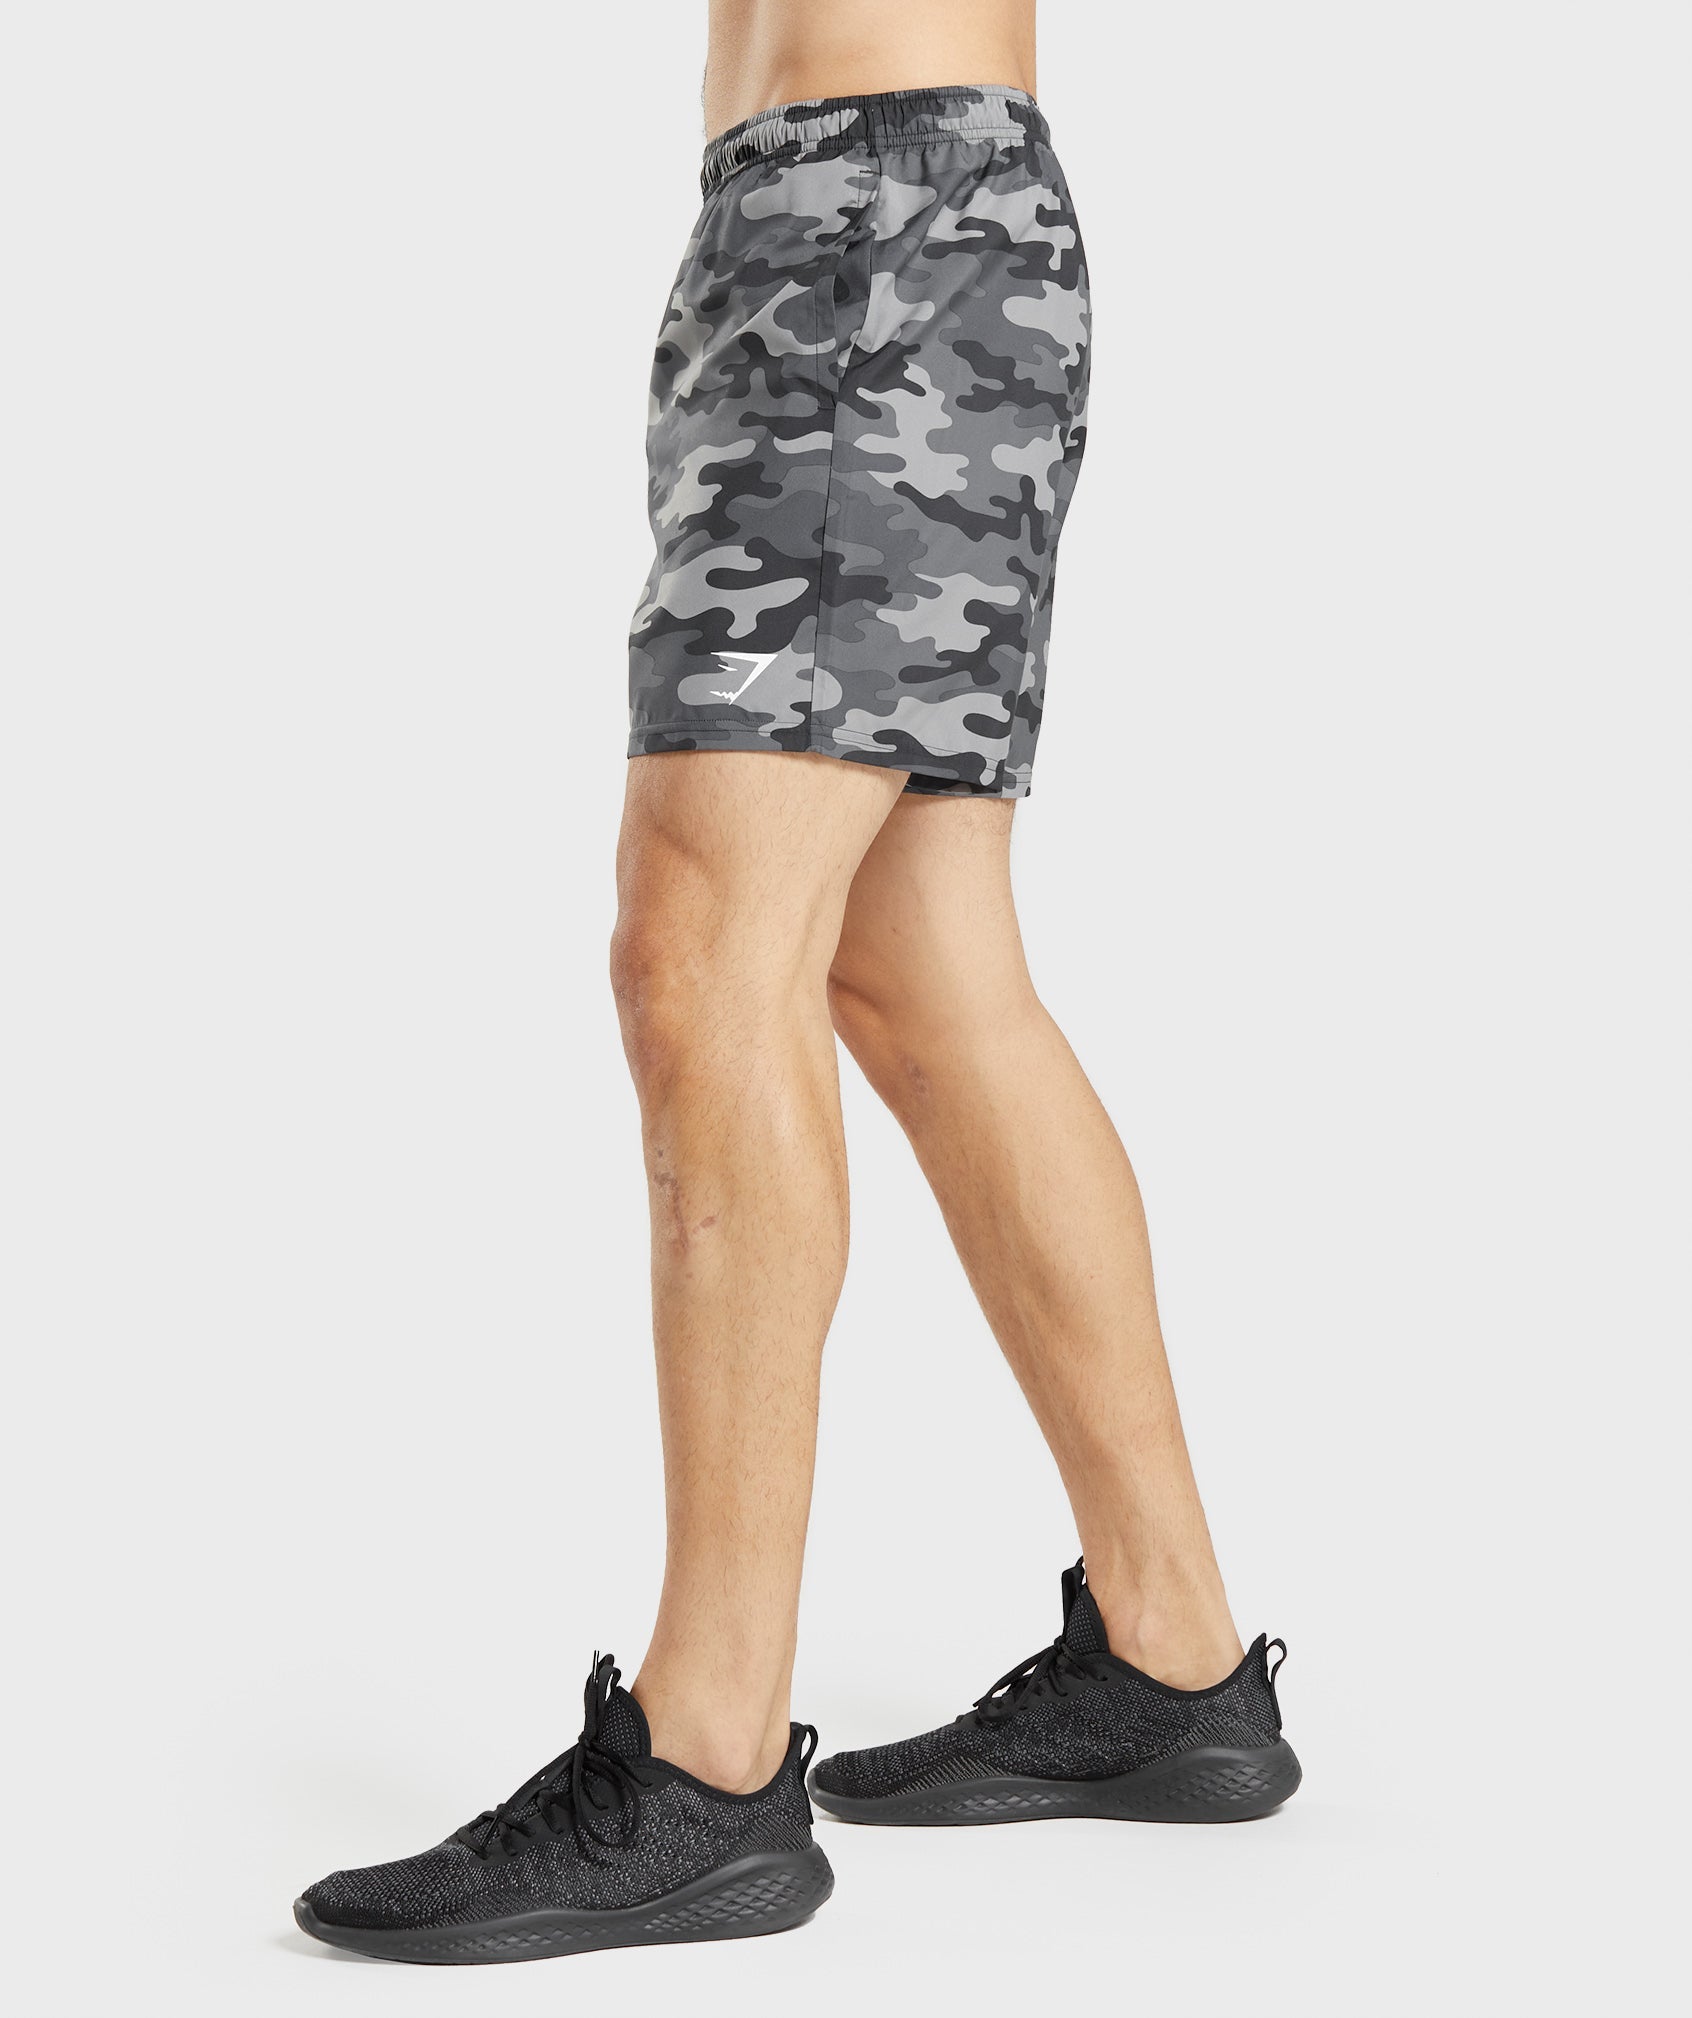 Arrival Shorts in Grey Print - view 3